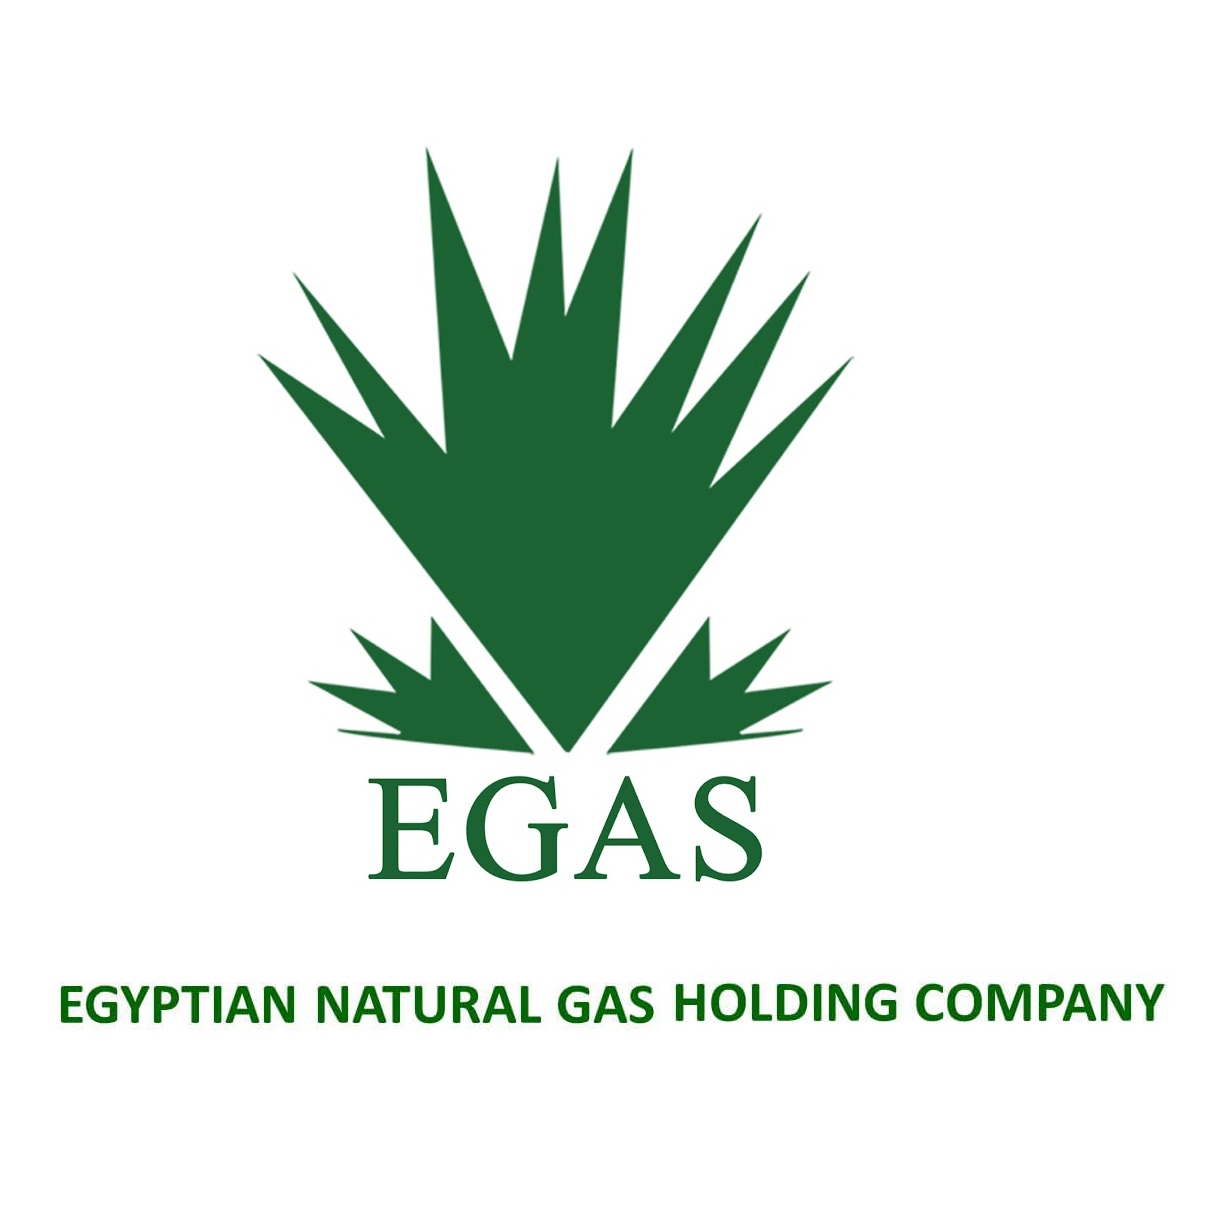 The Egyptian Natural Gas